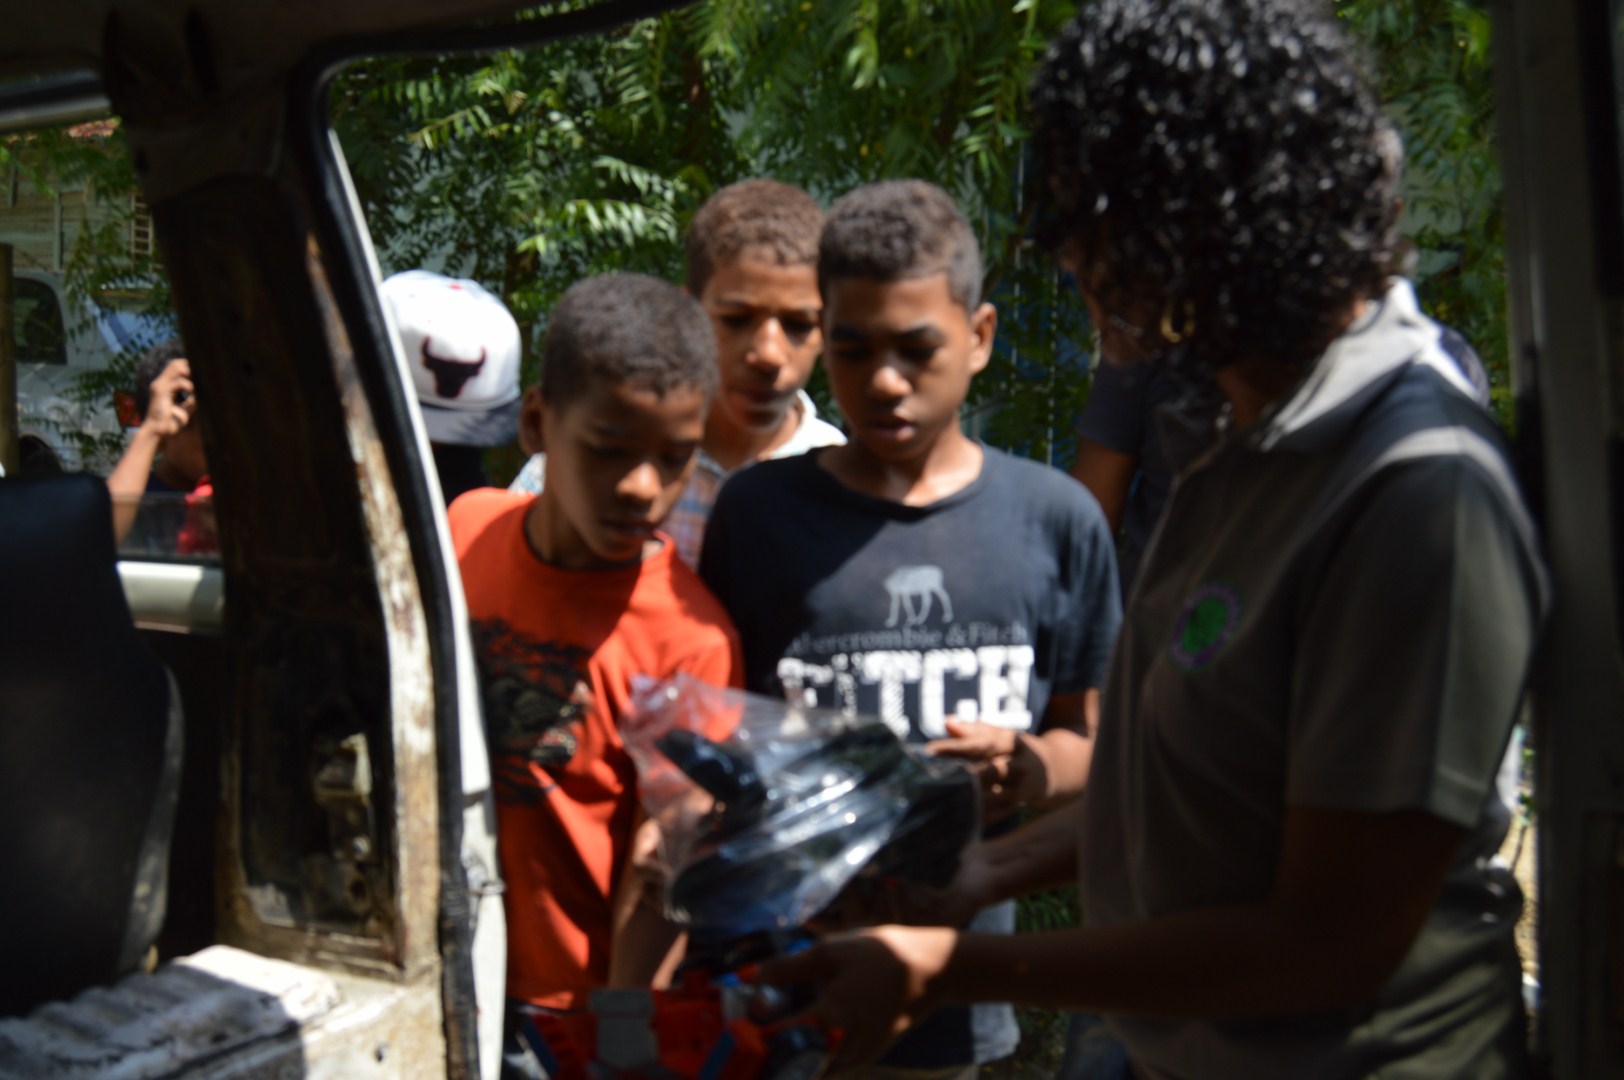 A group of older boys receiving gifts outside the car